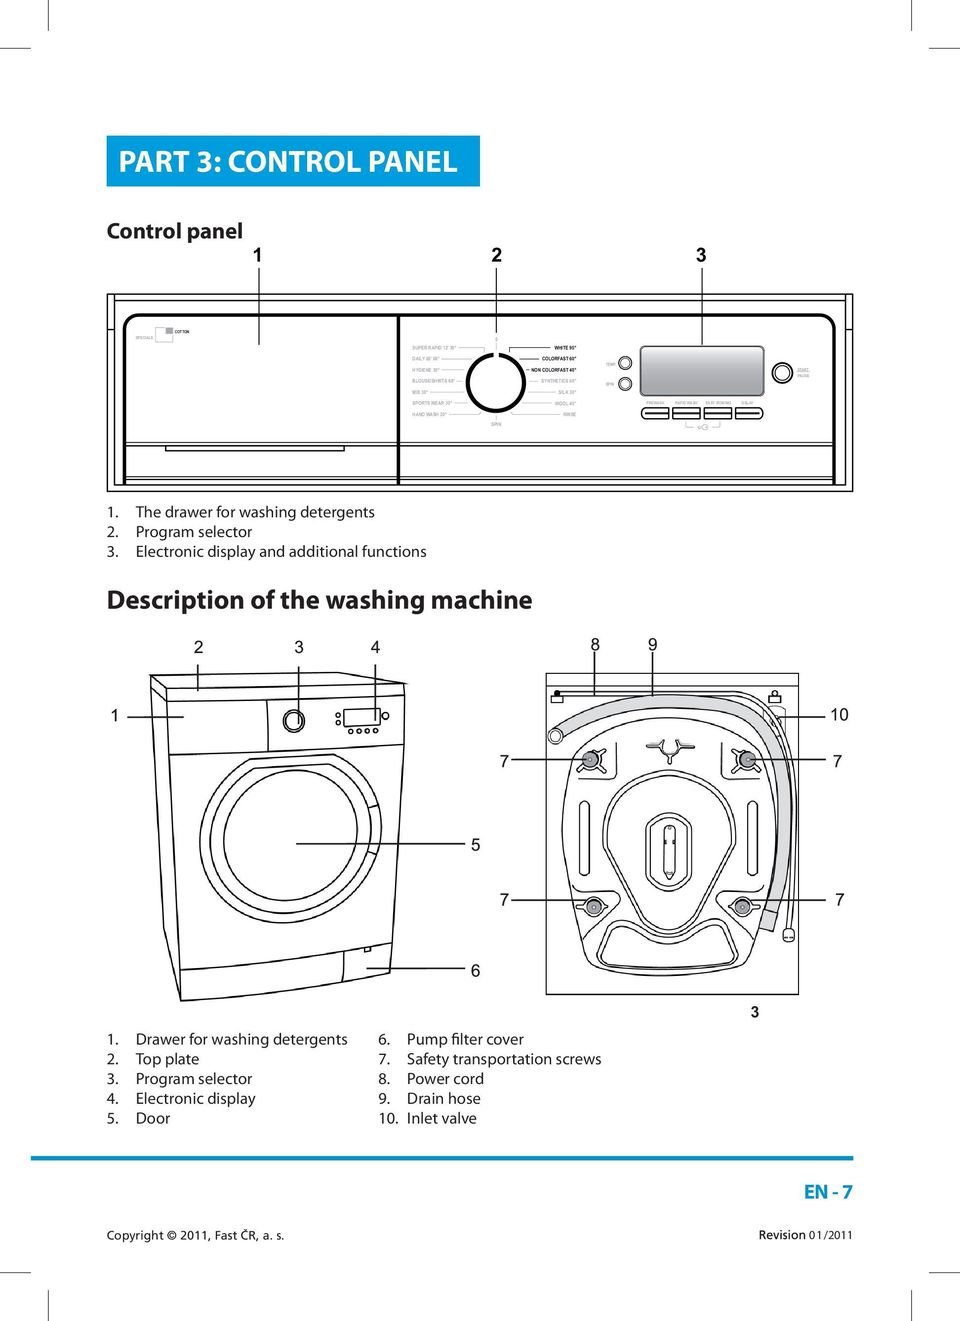 The drawer for washing detergents 2. Program selector 3. Electronic display and additional functions Description of the washing machine 1.